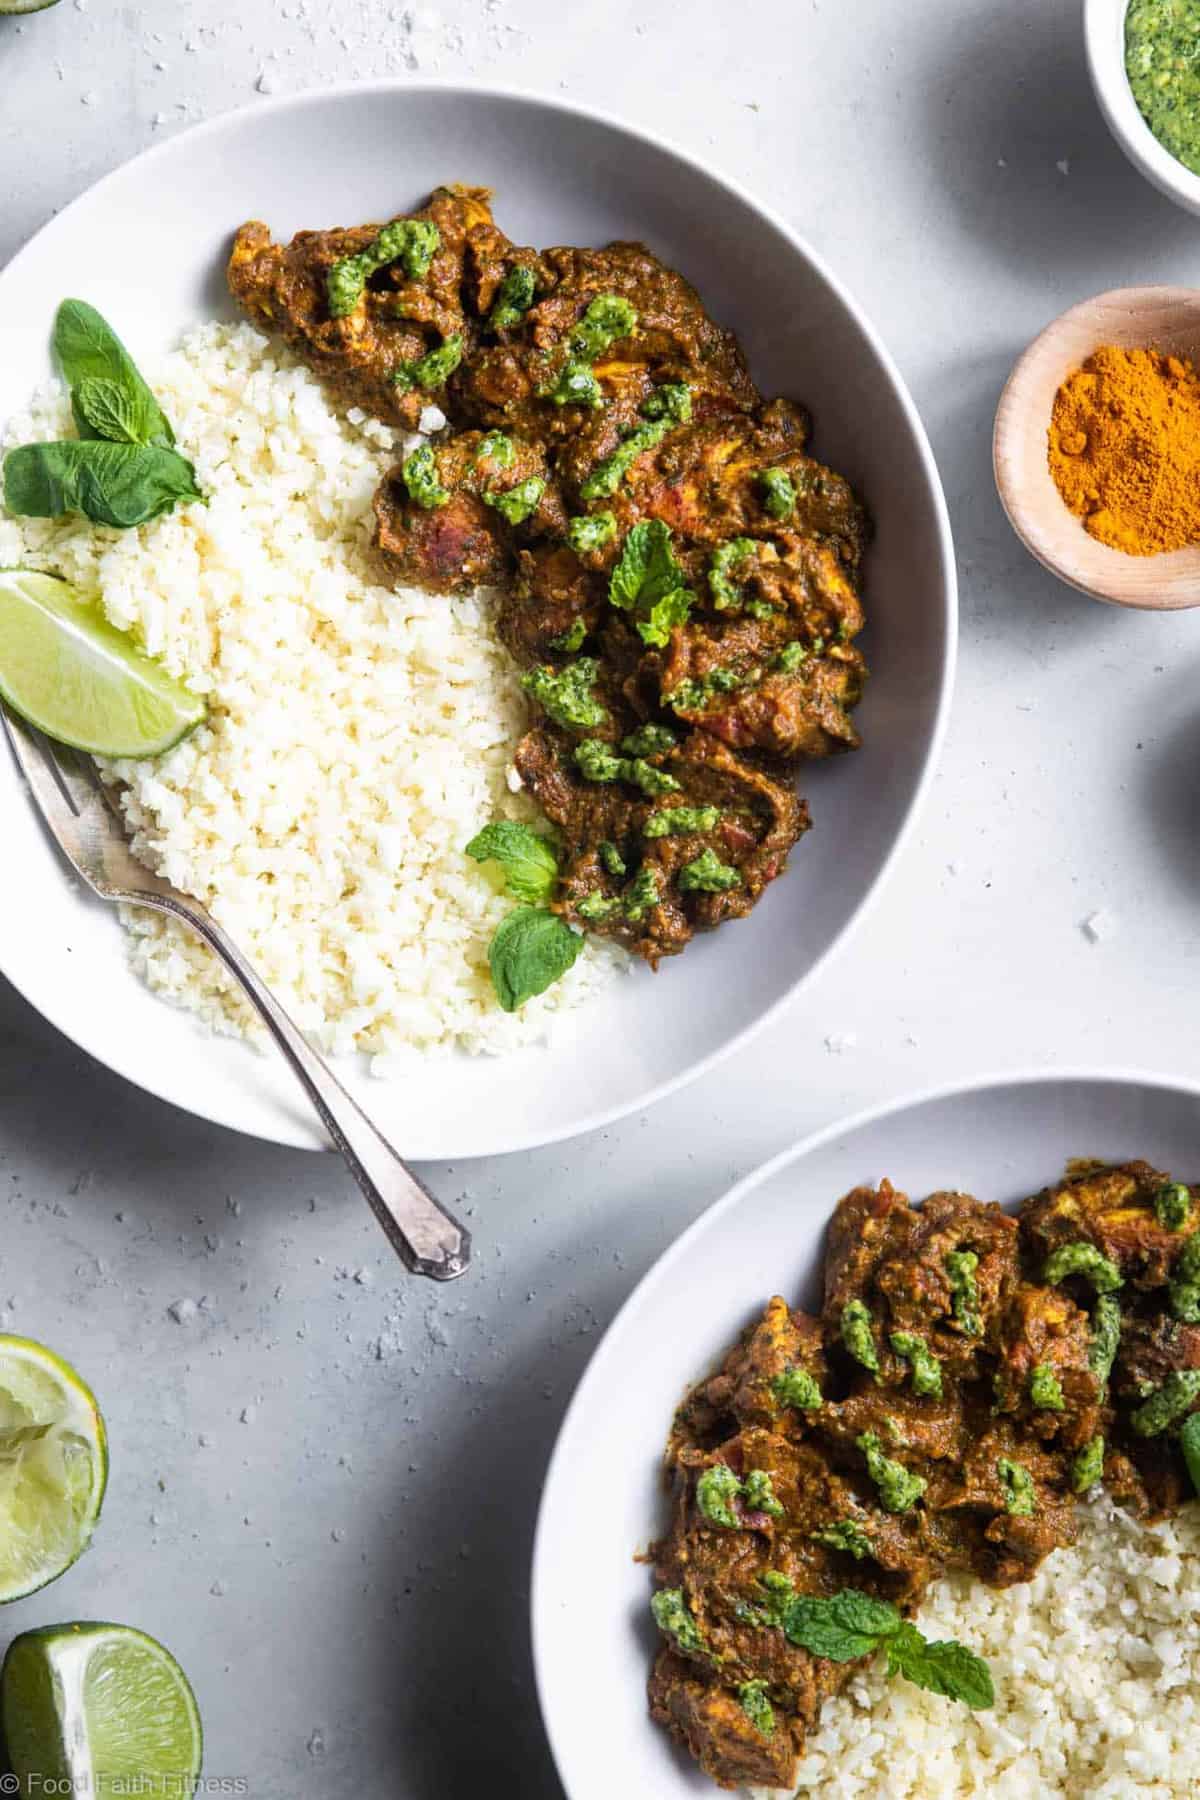 Indian Spiced Chicken with Cashew Cilantro Pesto - This chicken curry with a creamy pesto made of cashews is an easy, weeknight dinner with big bold flavor! Gluten free, paleo, whole30 and low carb too! | #Foodfaithfitness | #glutenfree #paleo #lowcarb #keto #whole30